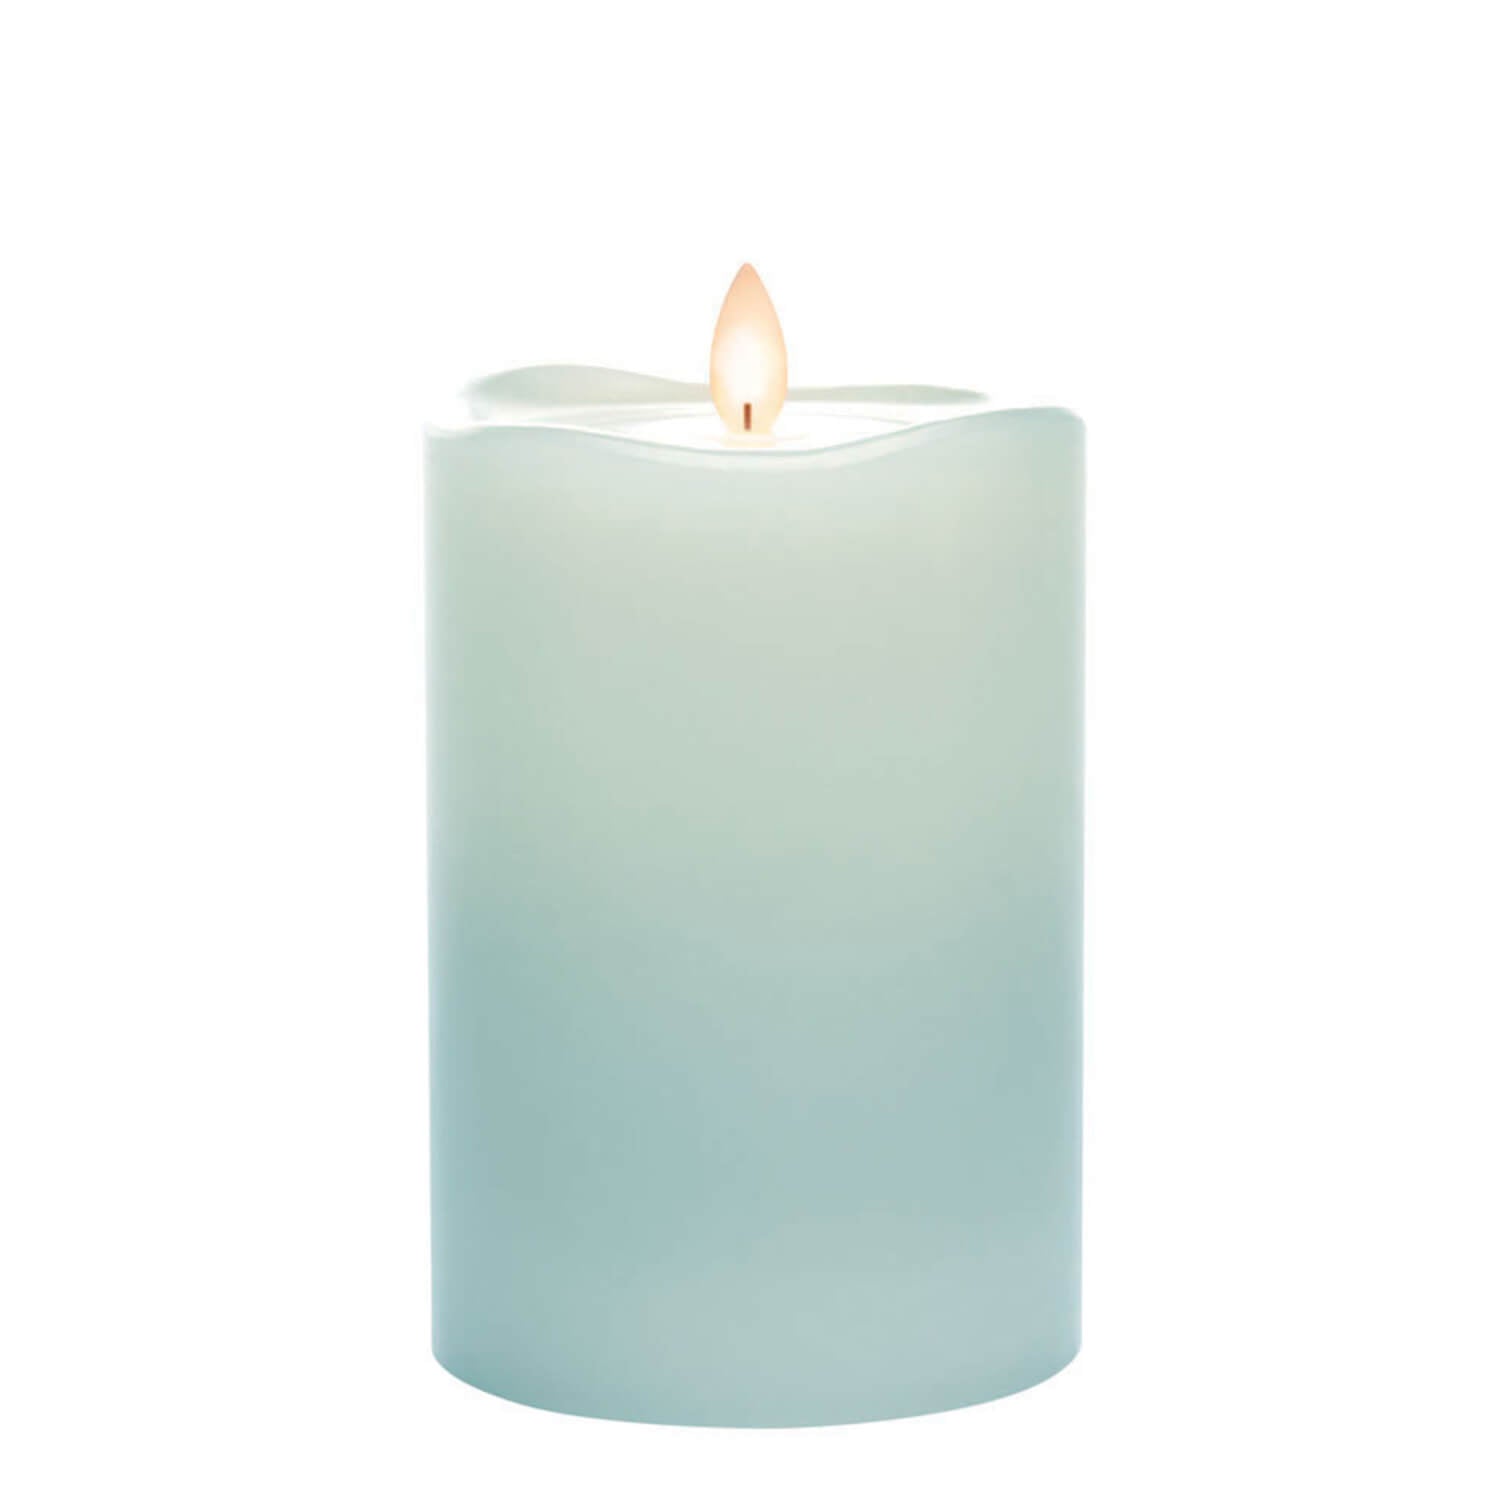 WAVE TOP 6" CANDLE SMOOTH PILLAR - Turquoise